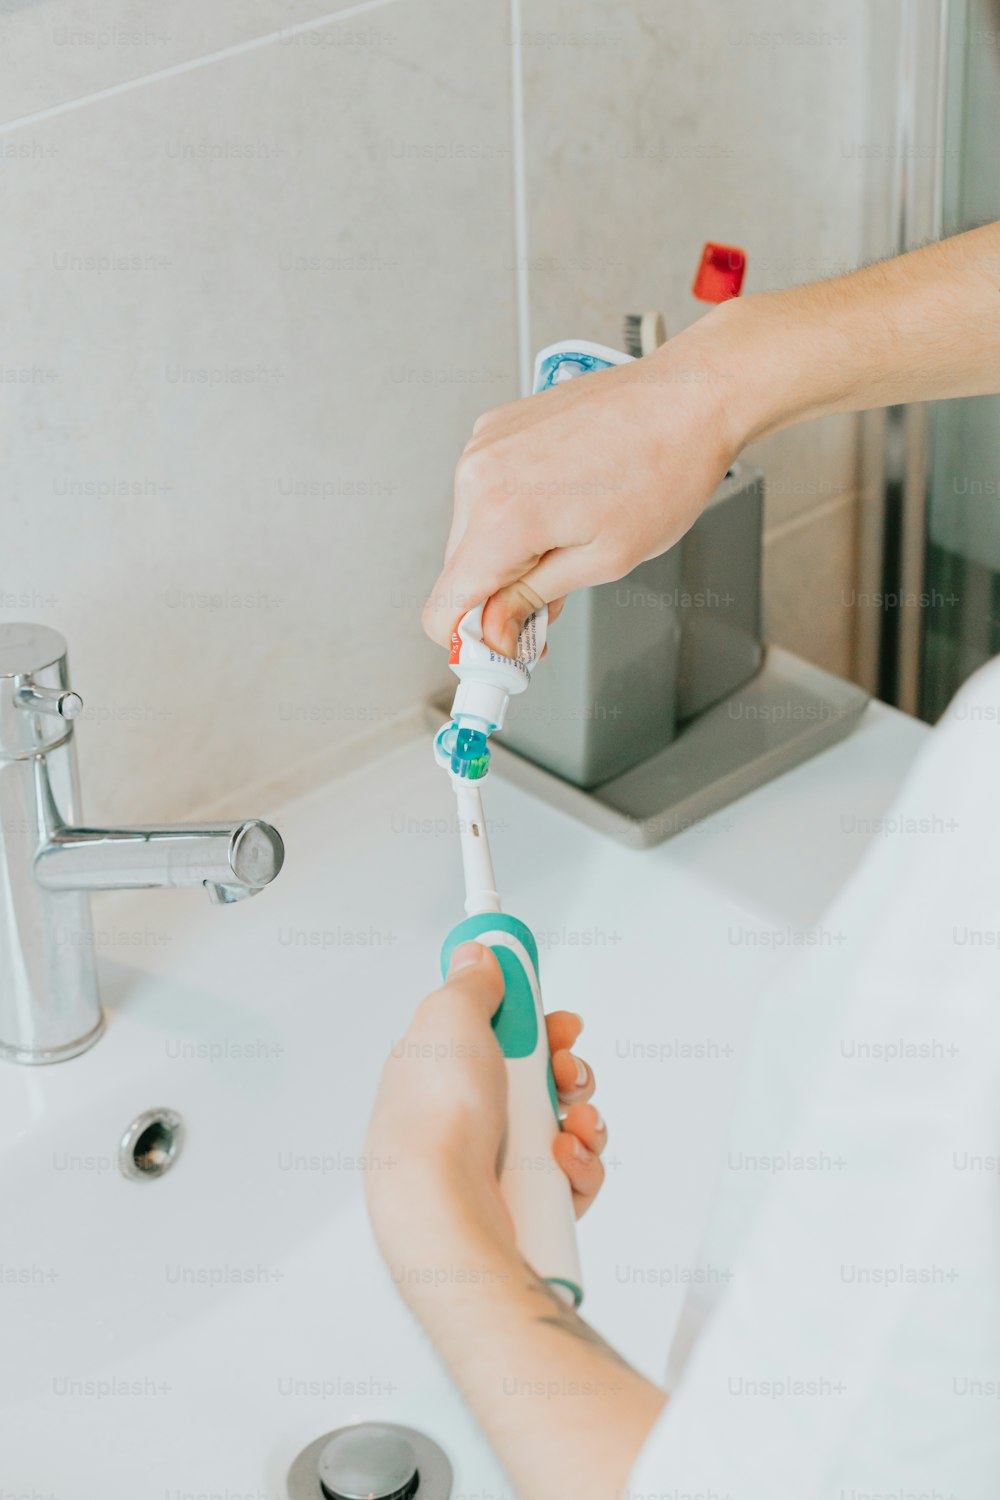 a person holding a toothbrush in a bathroom sink